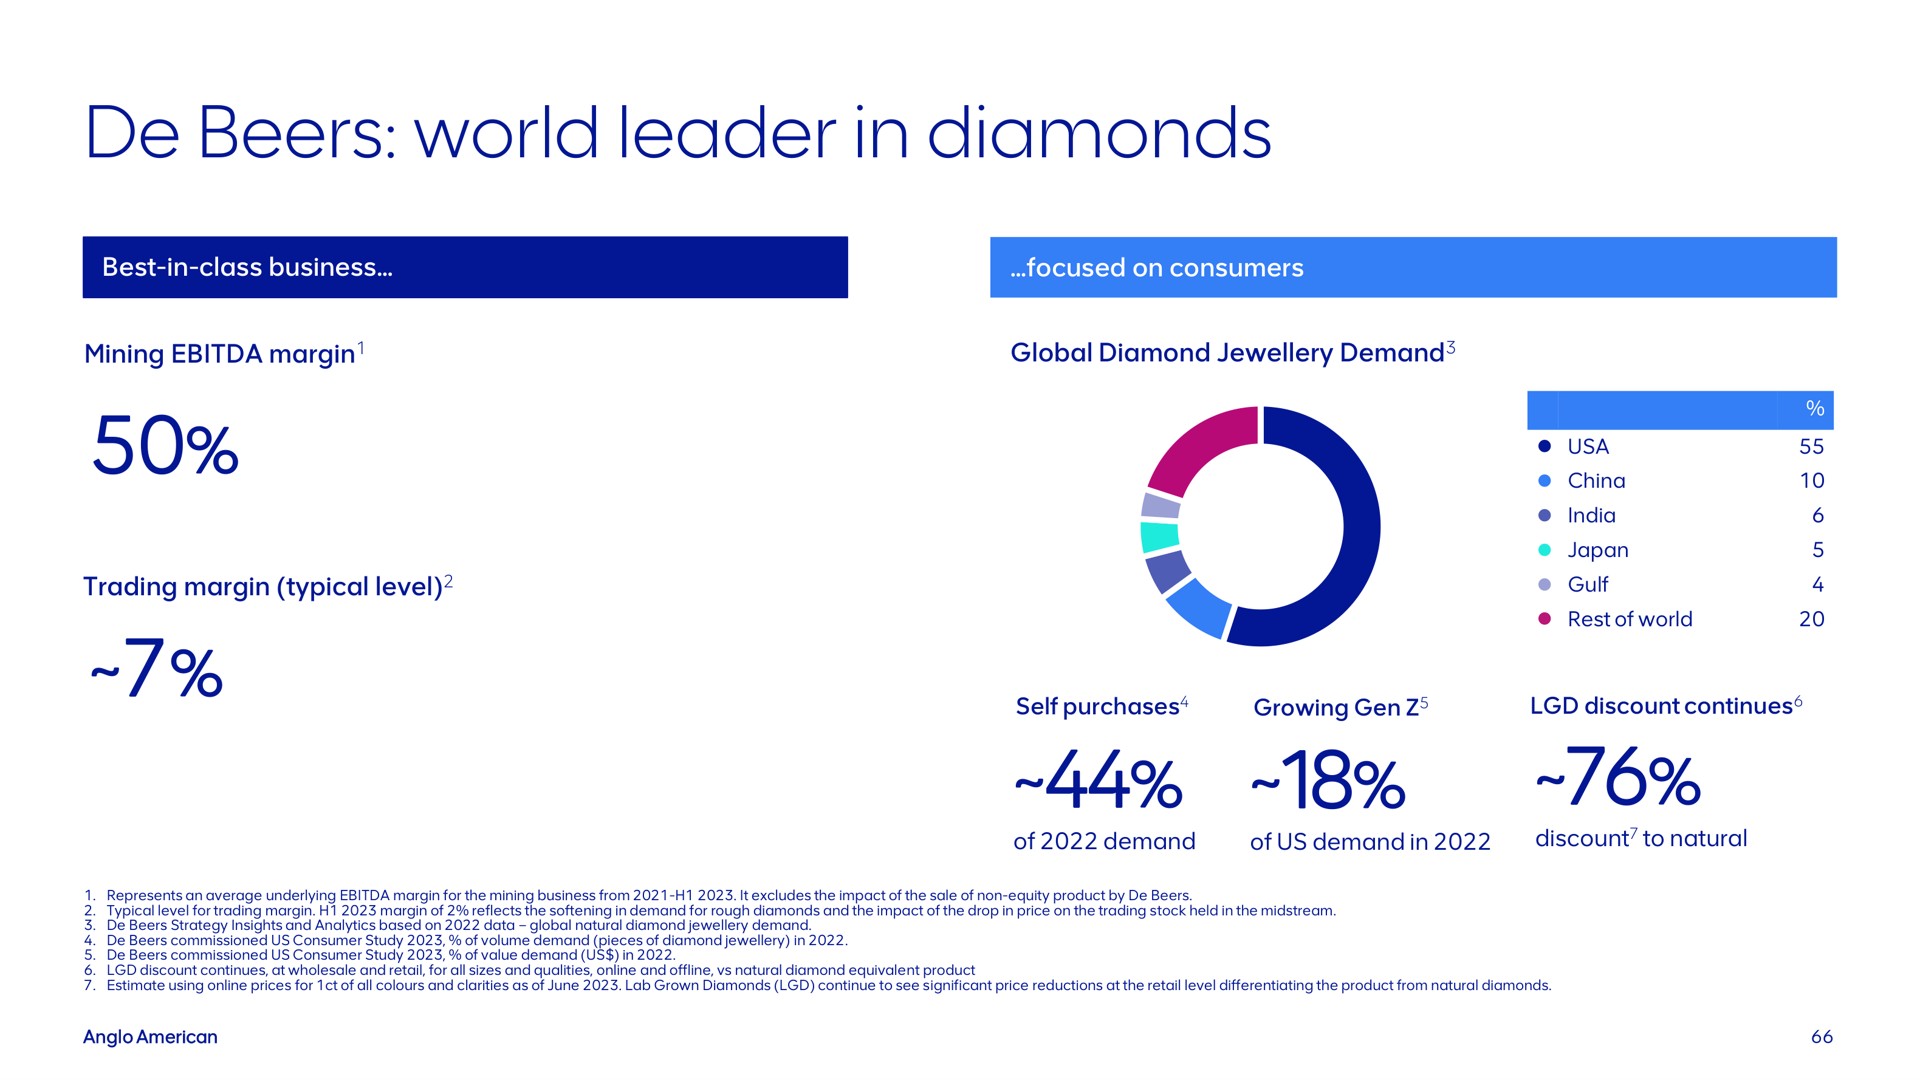 beers world leader in diamonds | AngloAmerican